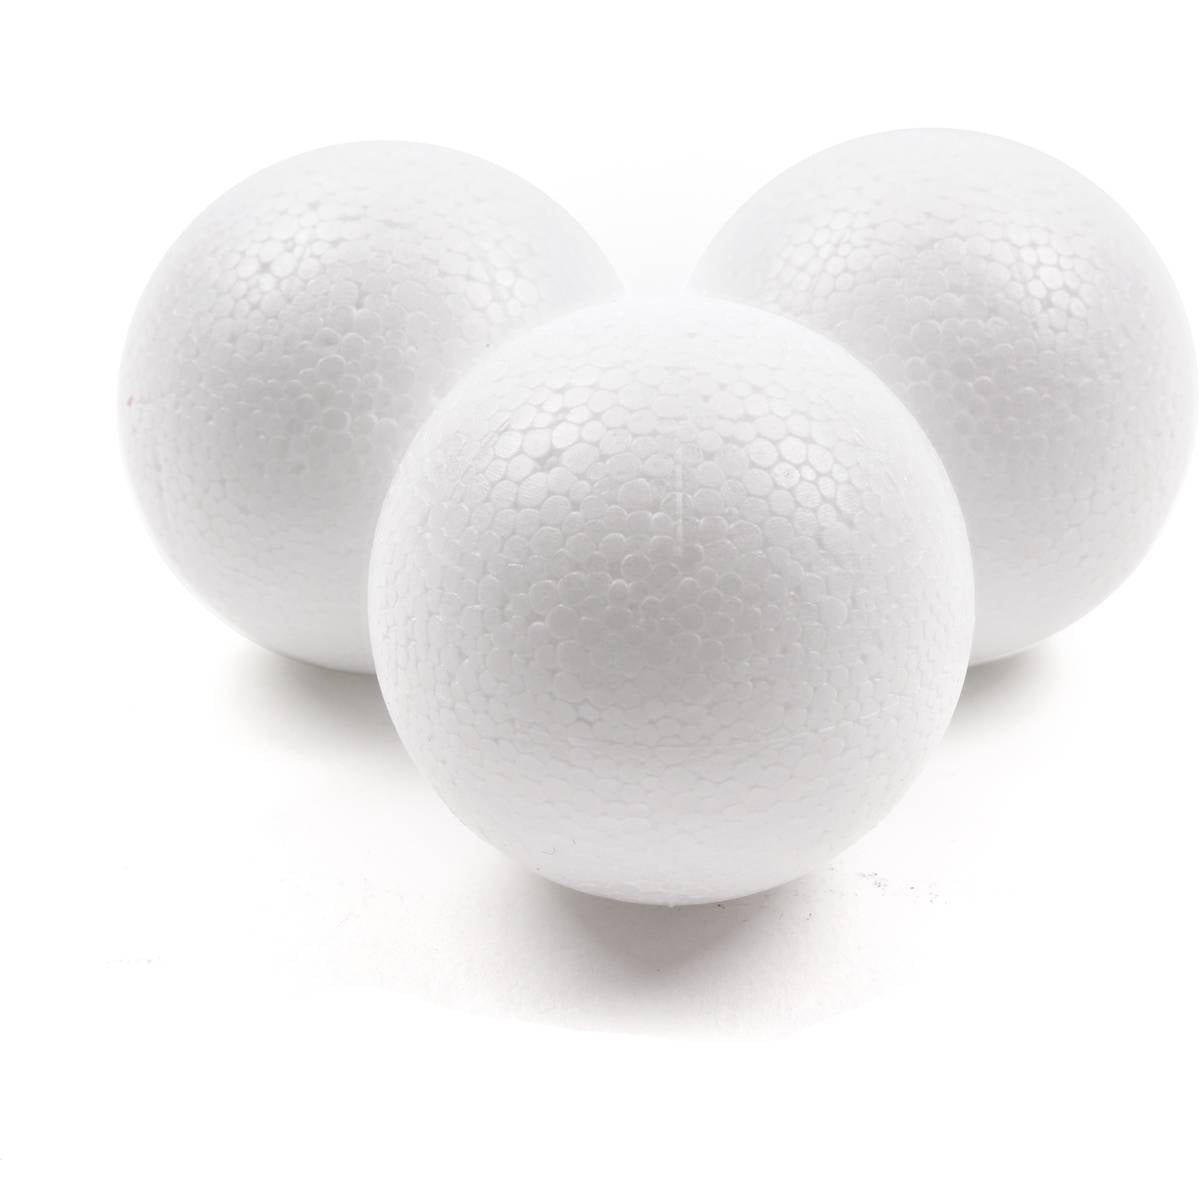 8 Inch Foam Ball Polystyrene Balls for Art & Crafts Projects